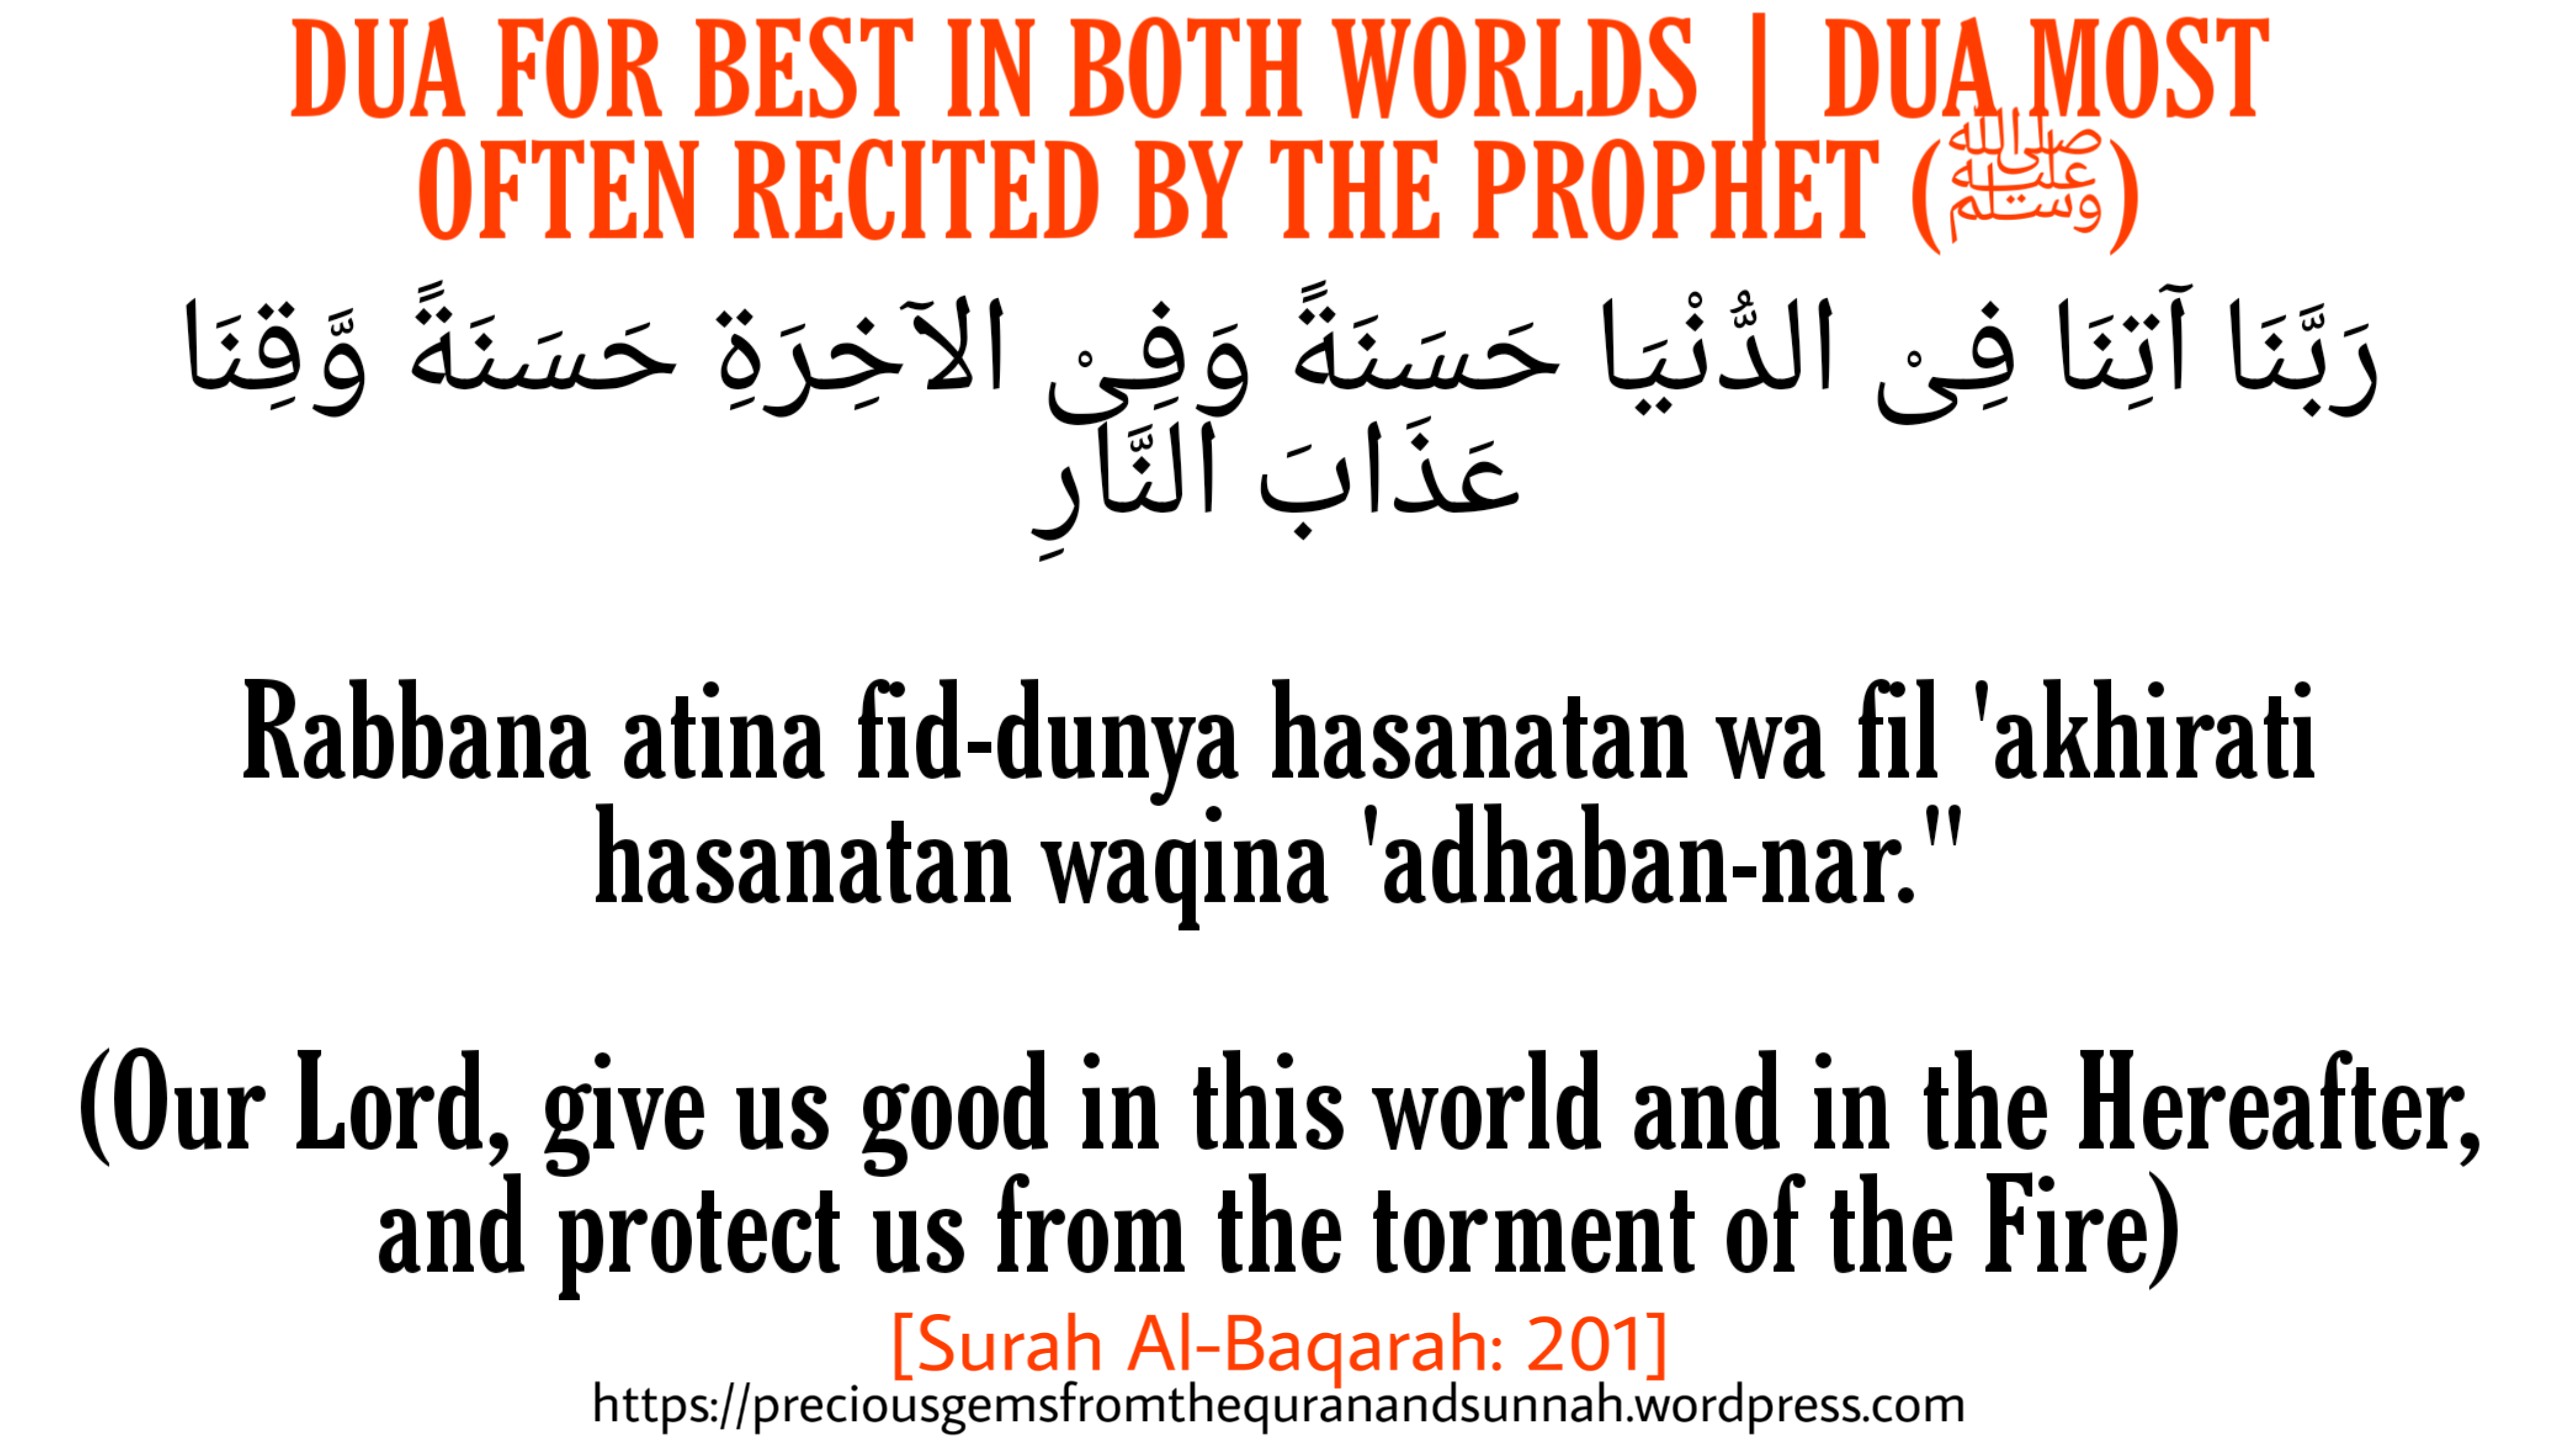 DUA FOR BEST IN BOTH WORLDS  DUA MOST OFTEN RECITED BY THE PROPHET (ﷺ) –  Precious Gems from the Quran and Sunnah